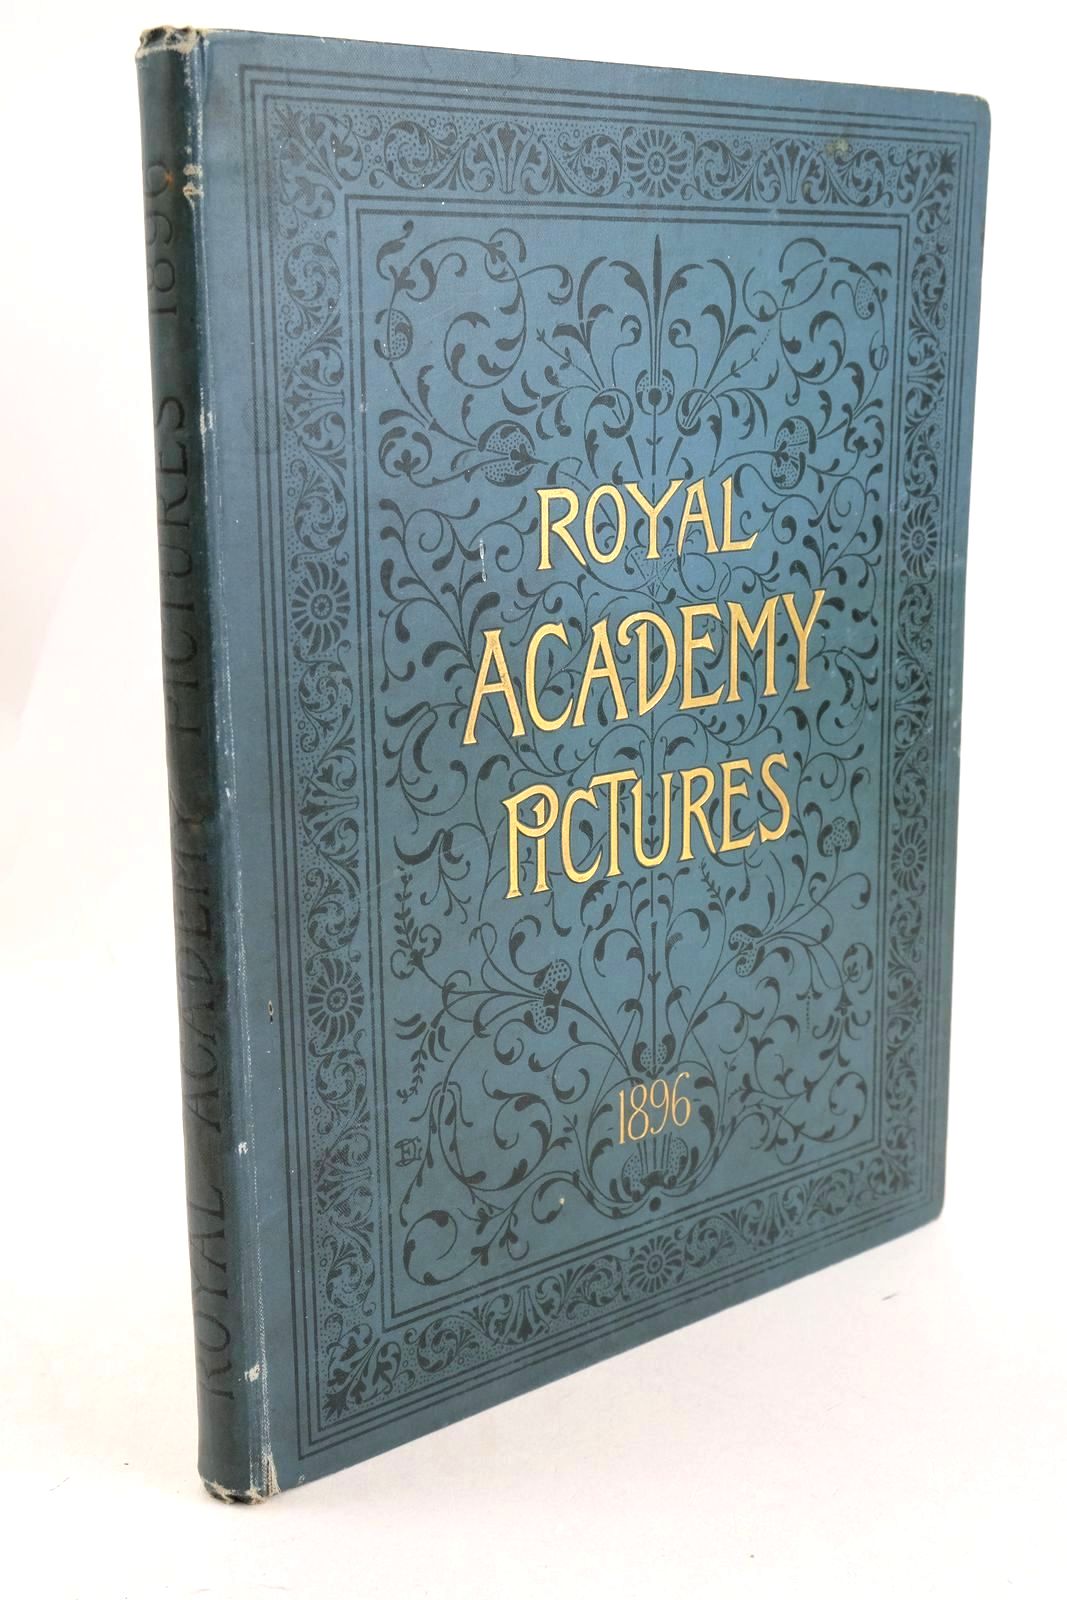 Photo of ROYAL ACADEMY PICTURES 1896 published by Cassell &amp; Company Limited (STOCK CODE: 1327179)  for sale by Stella & Rose's Books